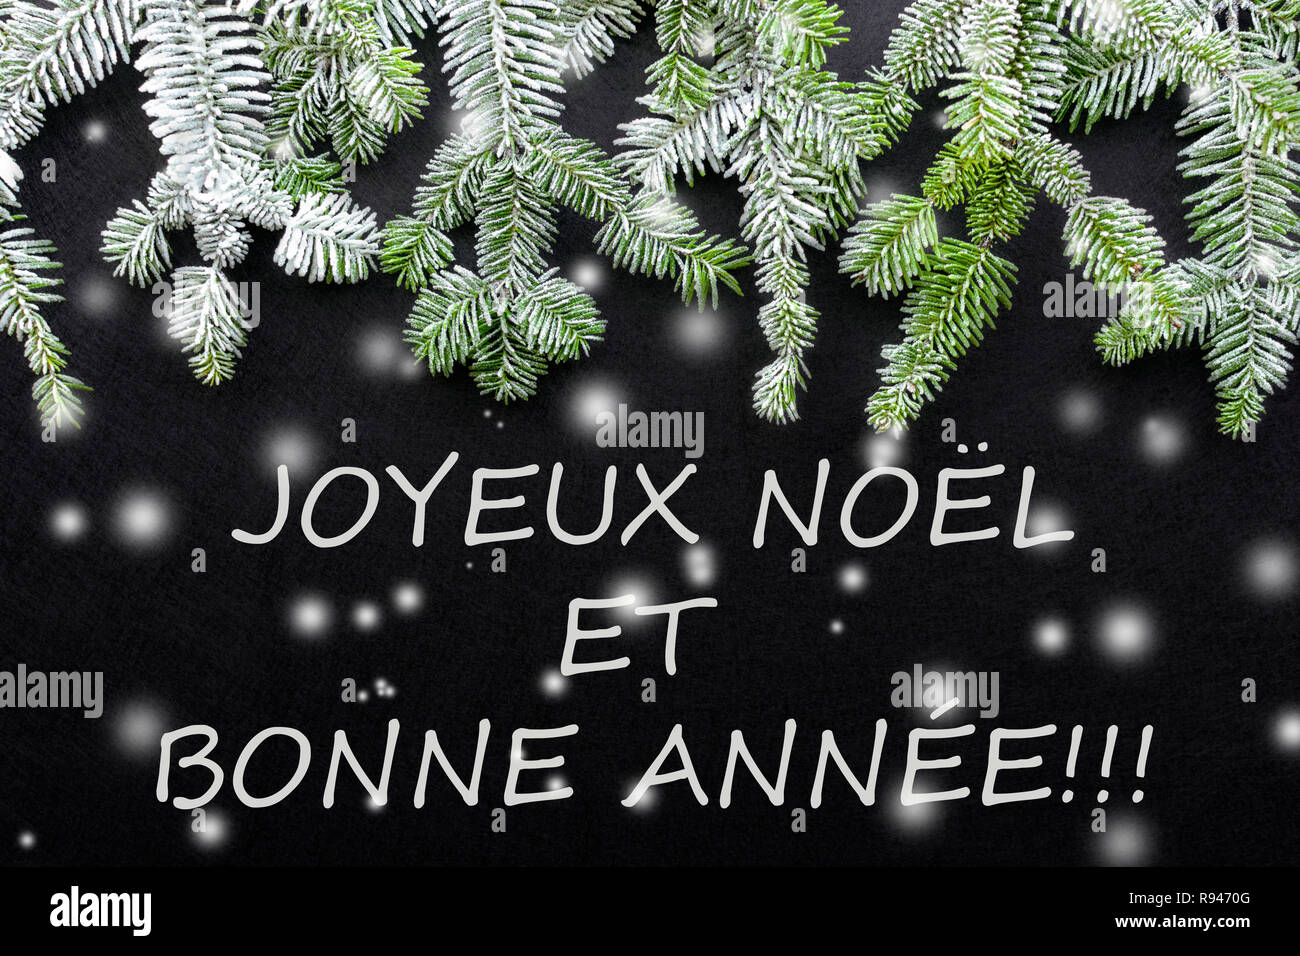 Fir tree and snow on dark background. Greetings Christmas card. Postcard. Christmastime. White and green.'Joyeux Noël' Stock Photo